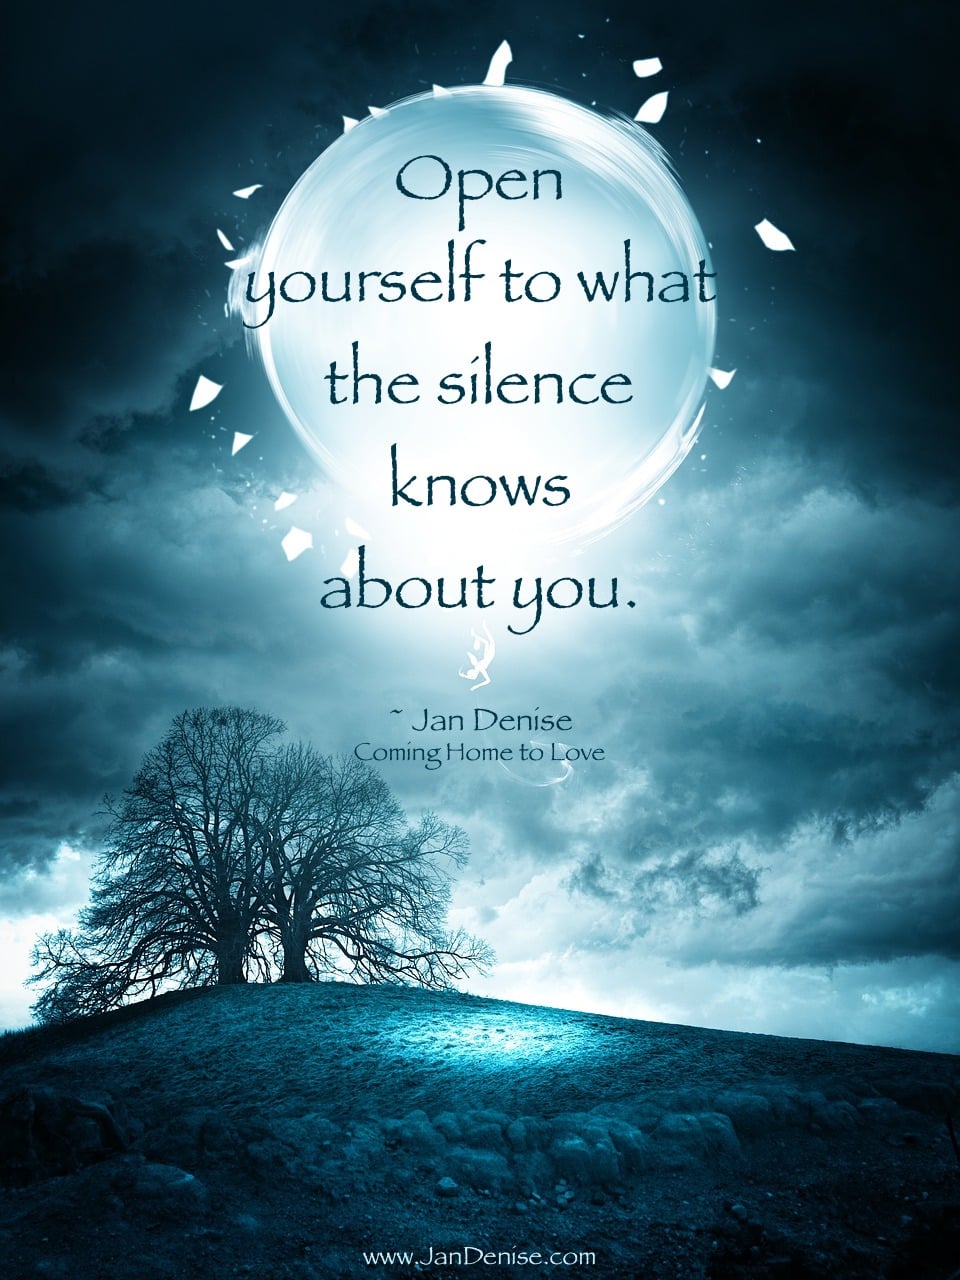 Listen for your inner knowing …